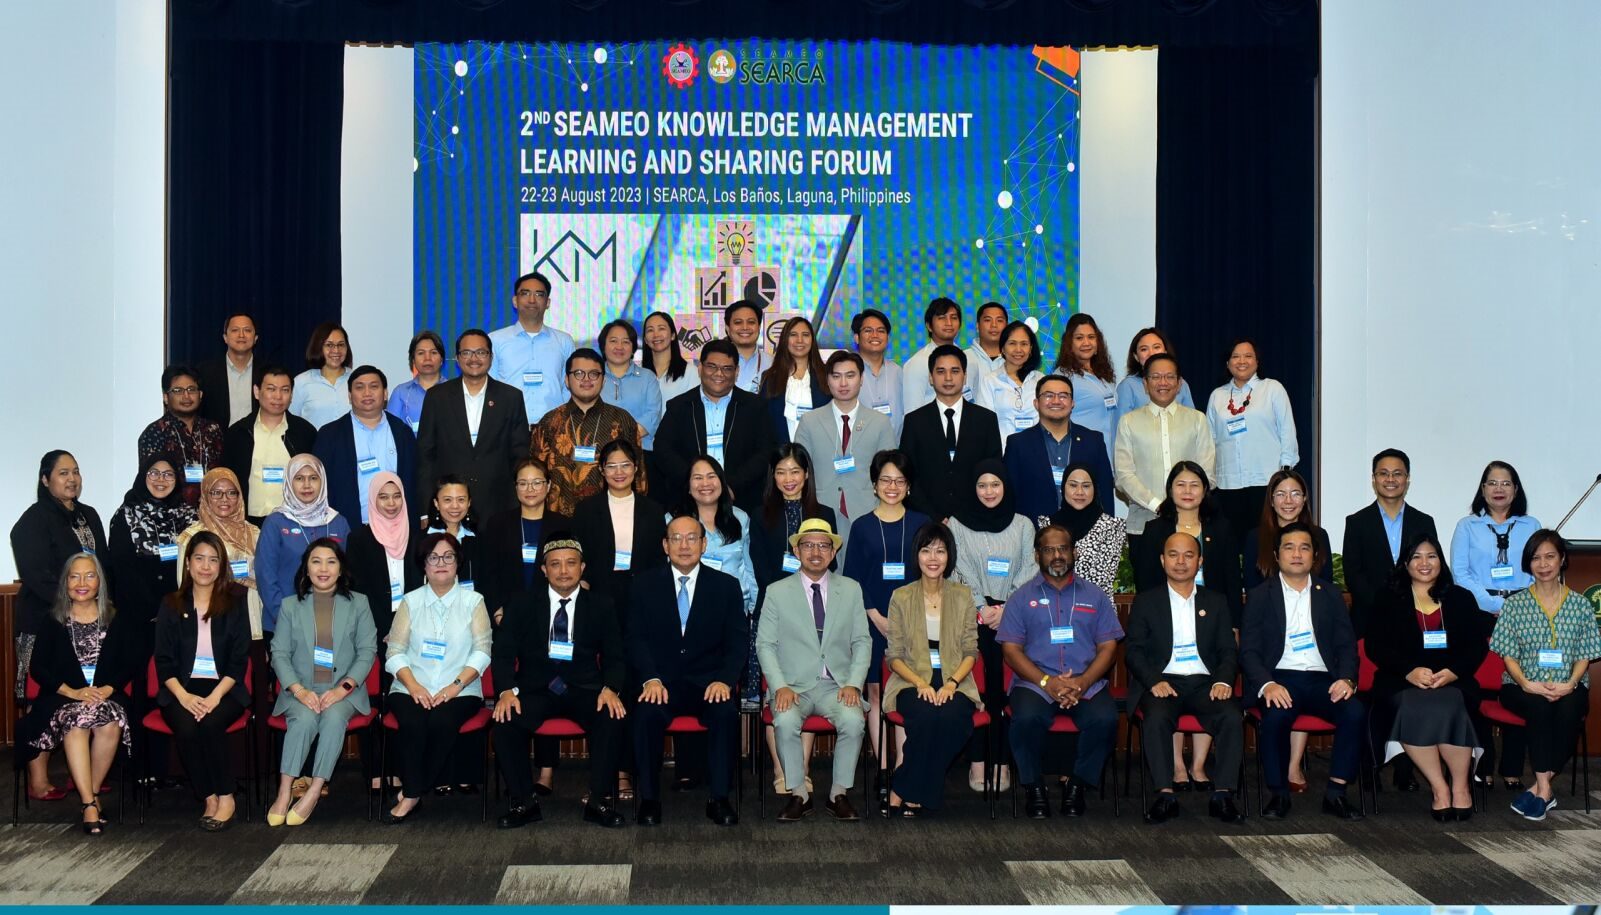 Representatives from SEAMEO centers pose for a picture during day one of the Second Knowledge Management Learning and Sharing Forum.